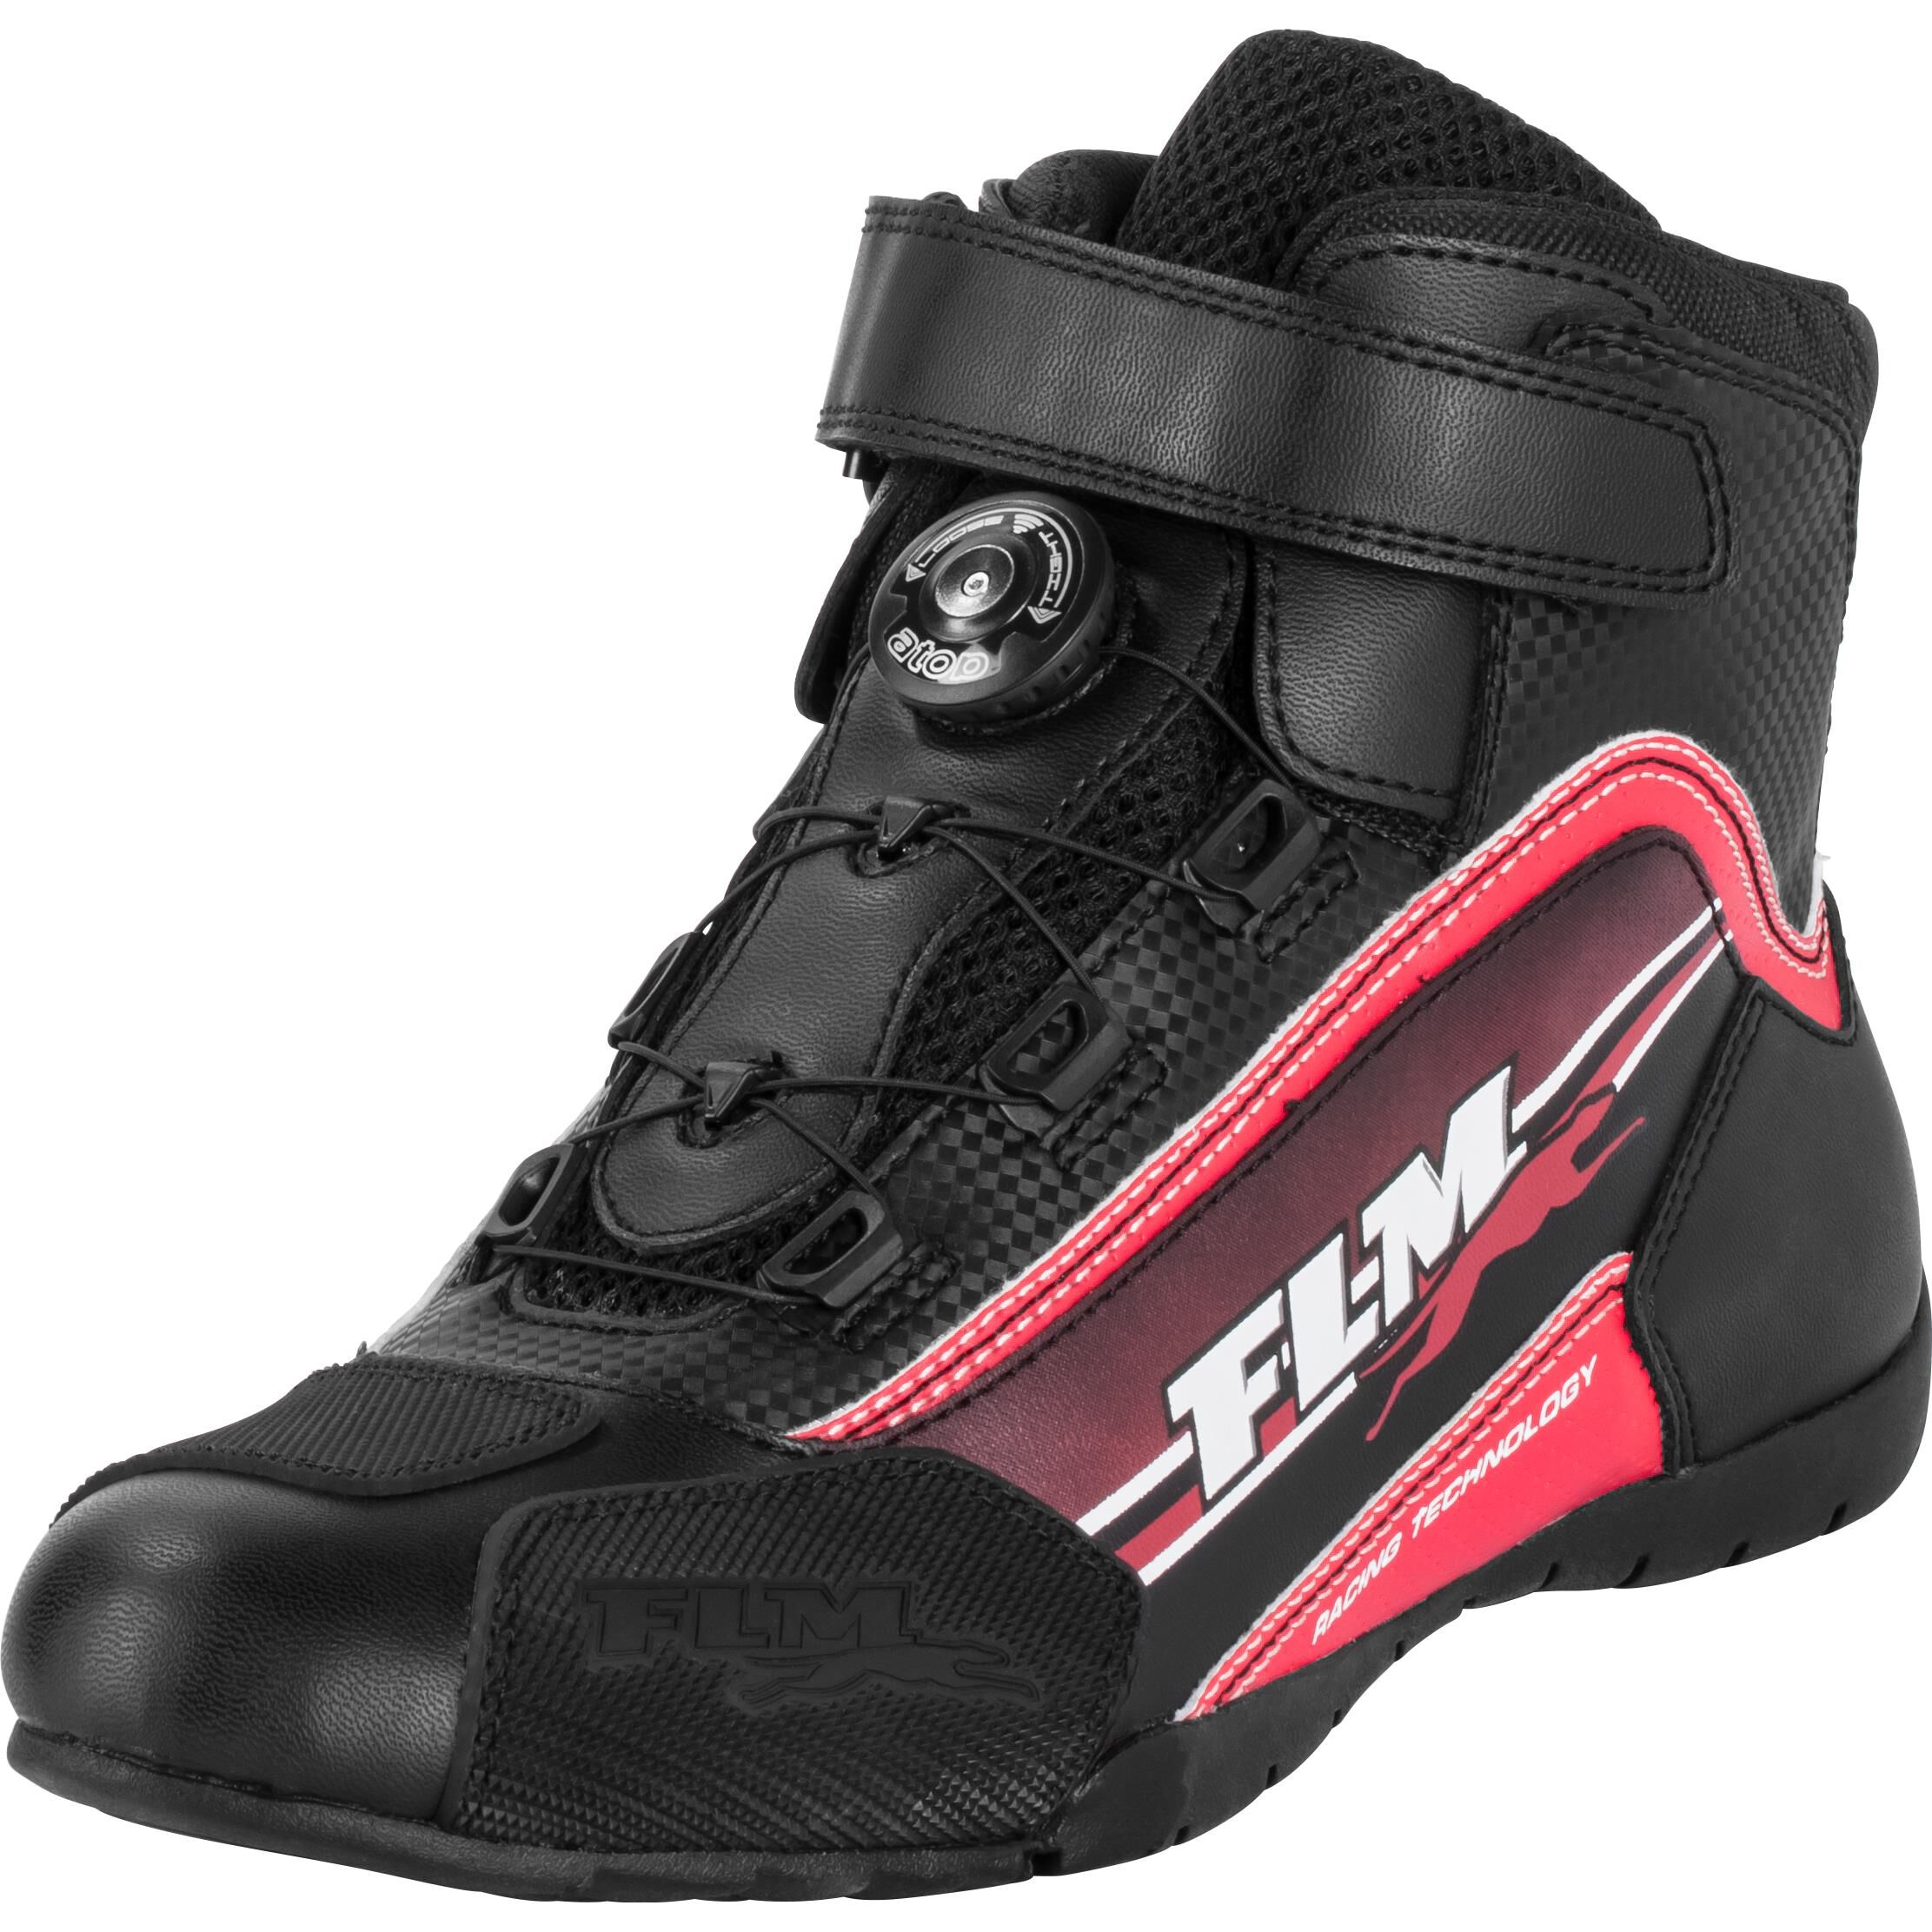 Men's Track Race Boots – POLO